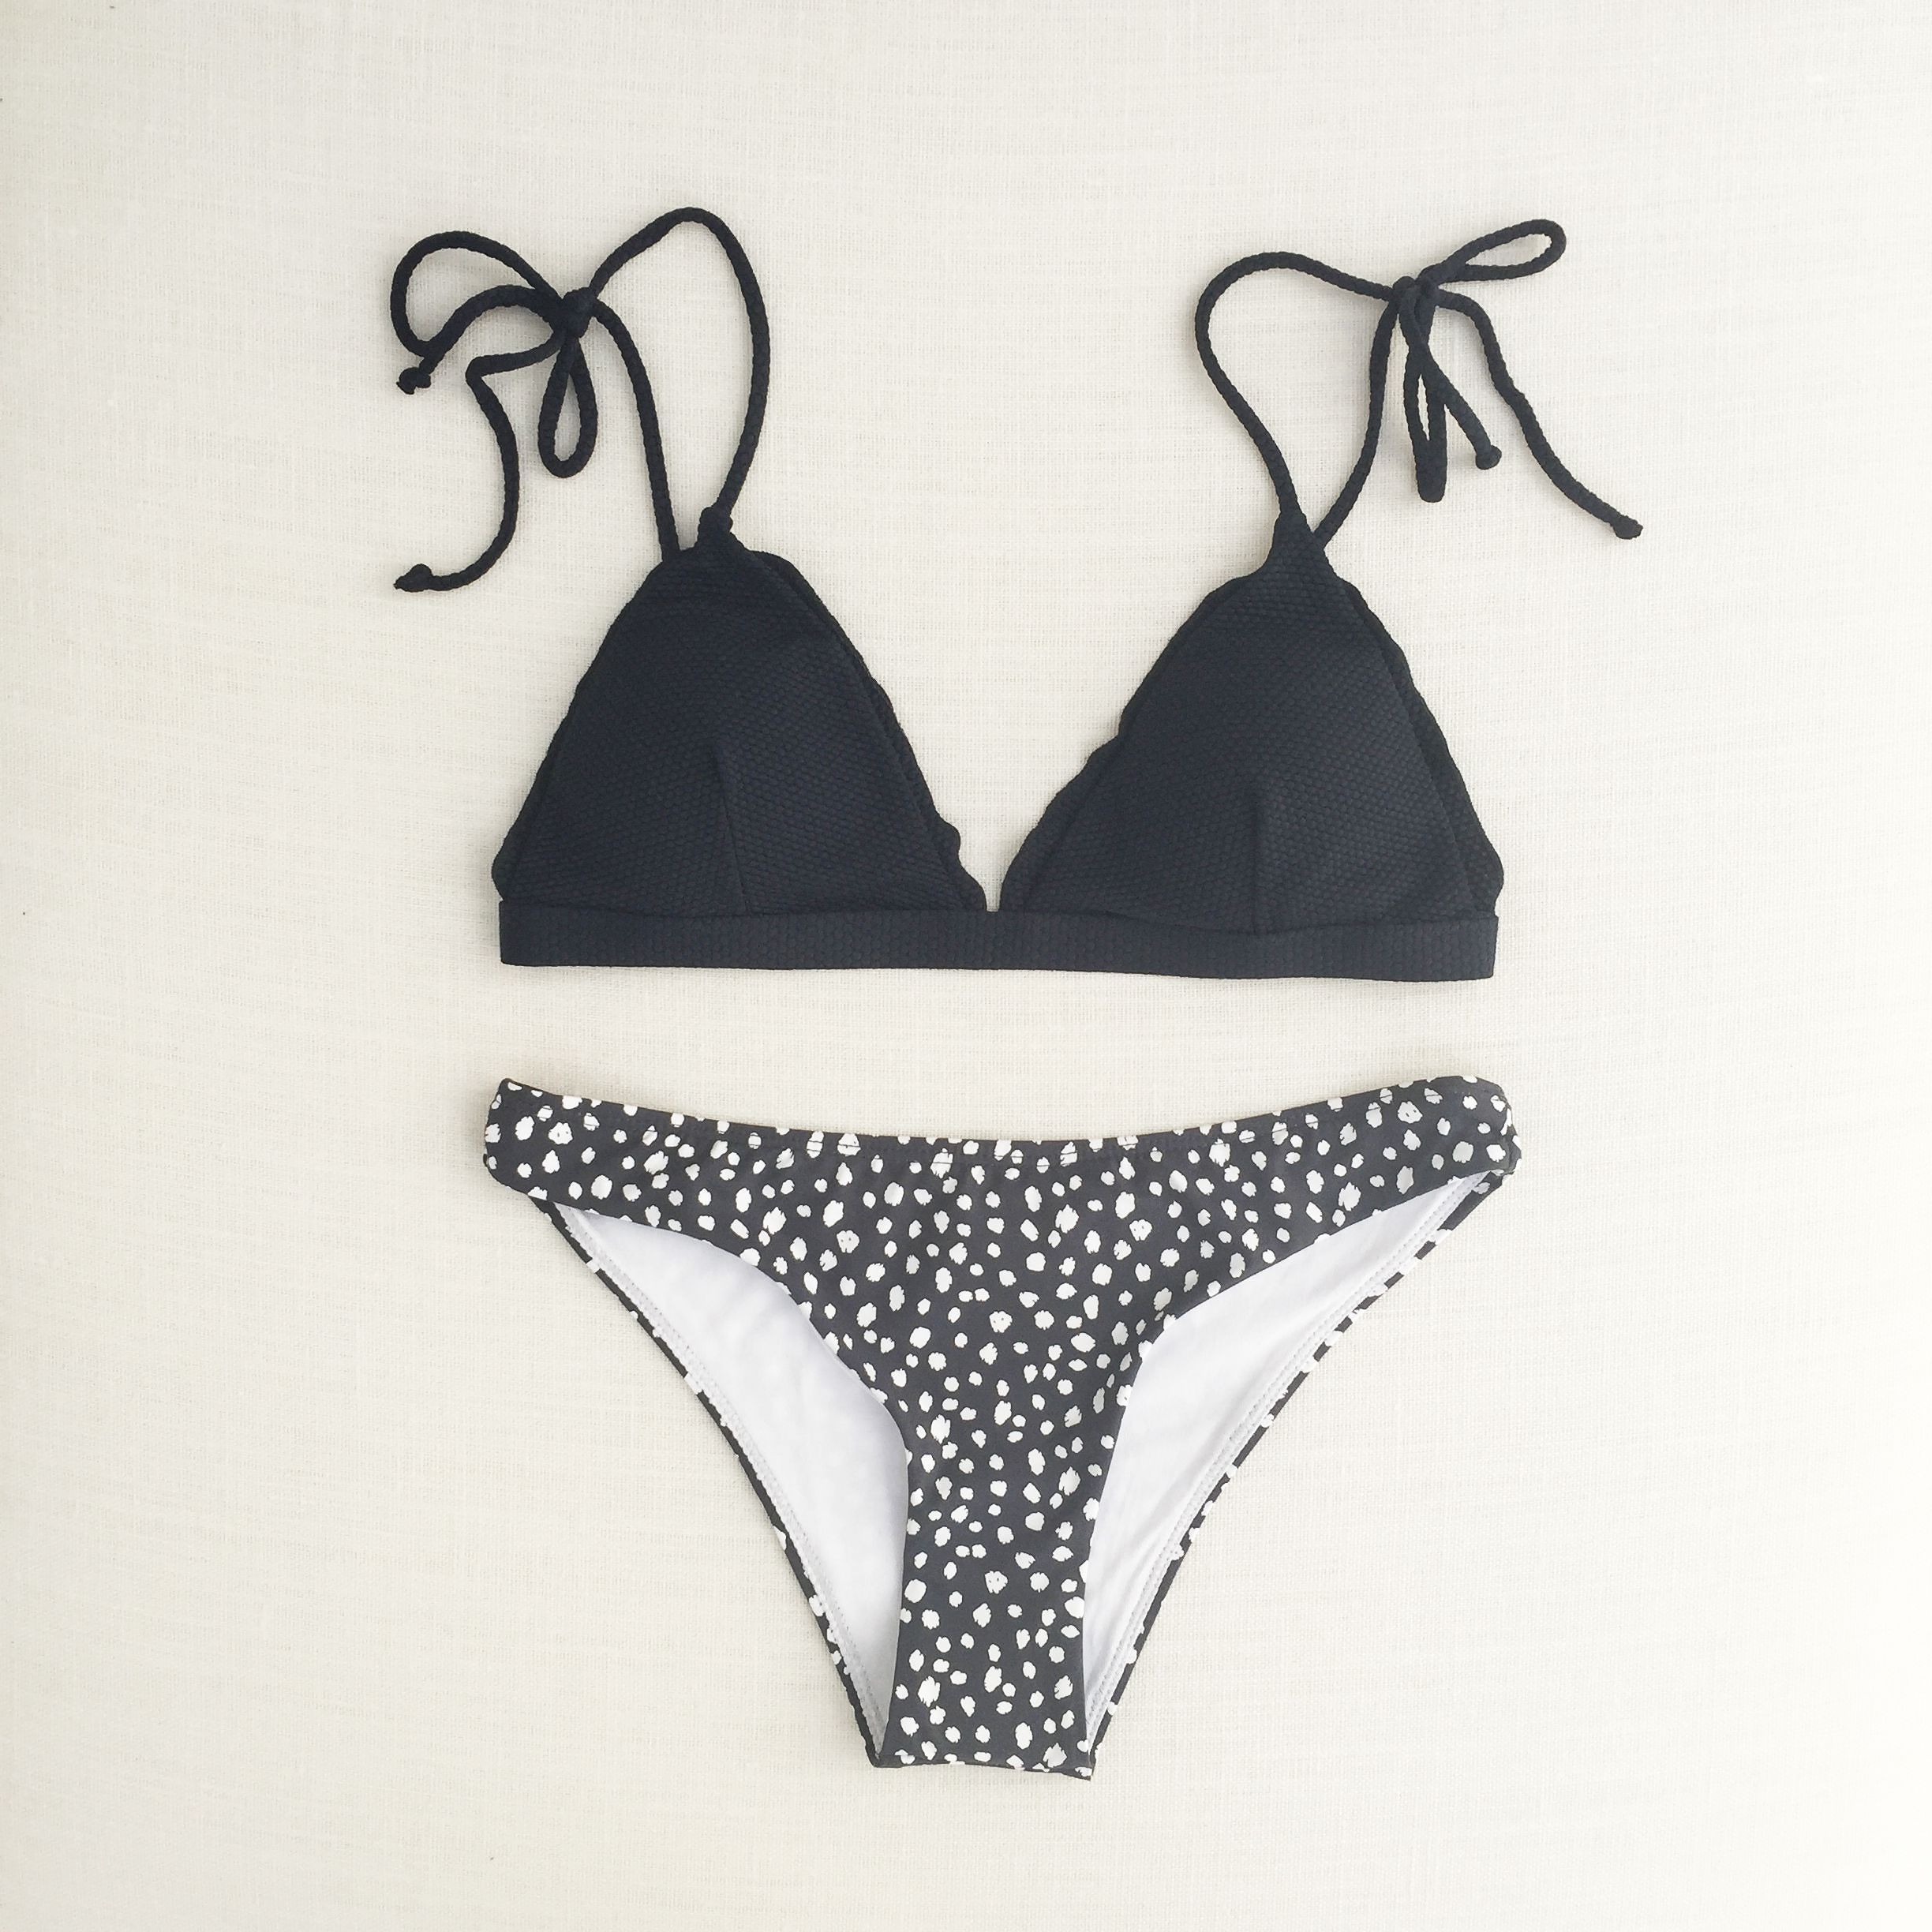 Our_Dusk_Shell_Bralette___Dusk_Speckle_Staple_Pant._The_perfect_mix_and_match_combo._Limited_second_run_now_available_for_pre-order_from_our_online_boutique._X_by_peonyswimwear.jpg